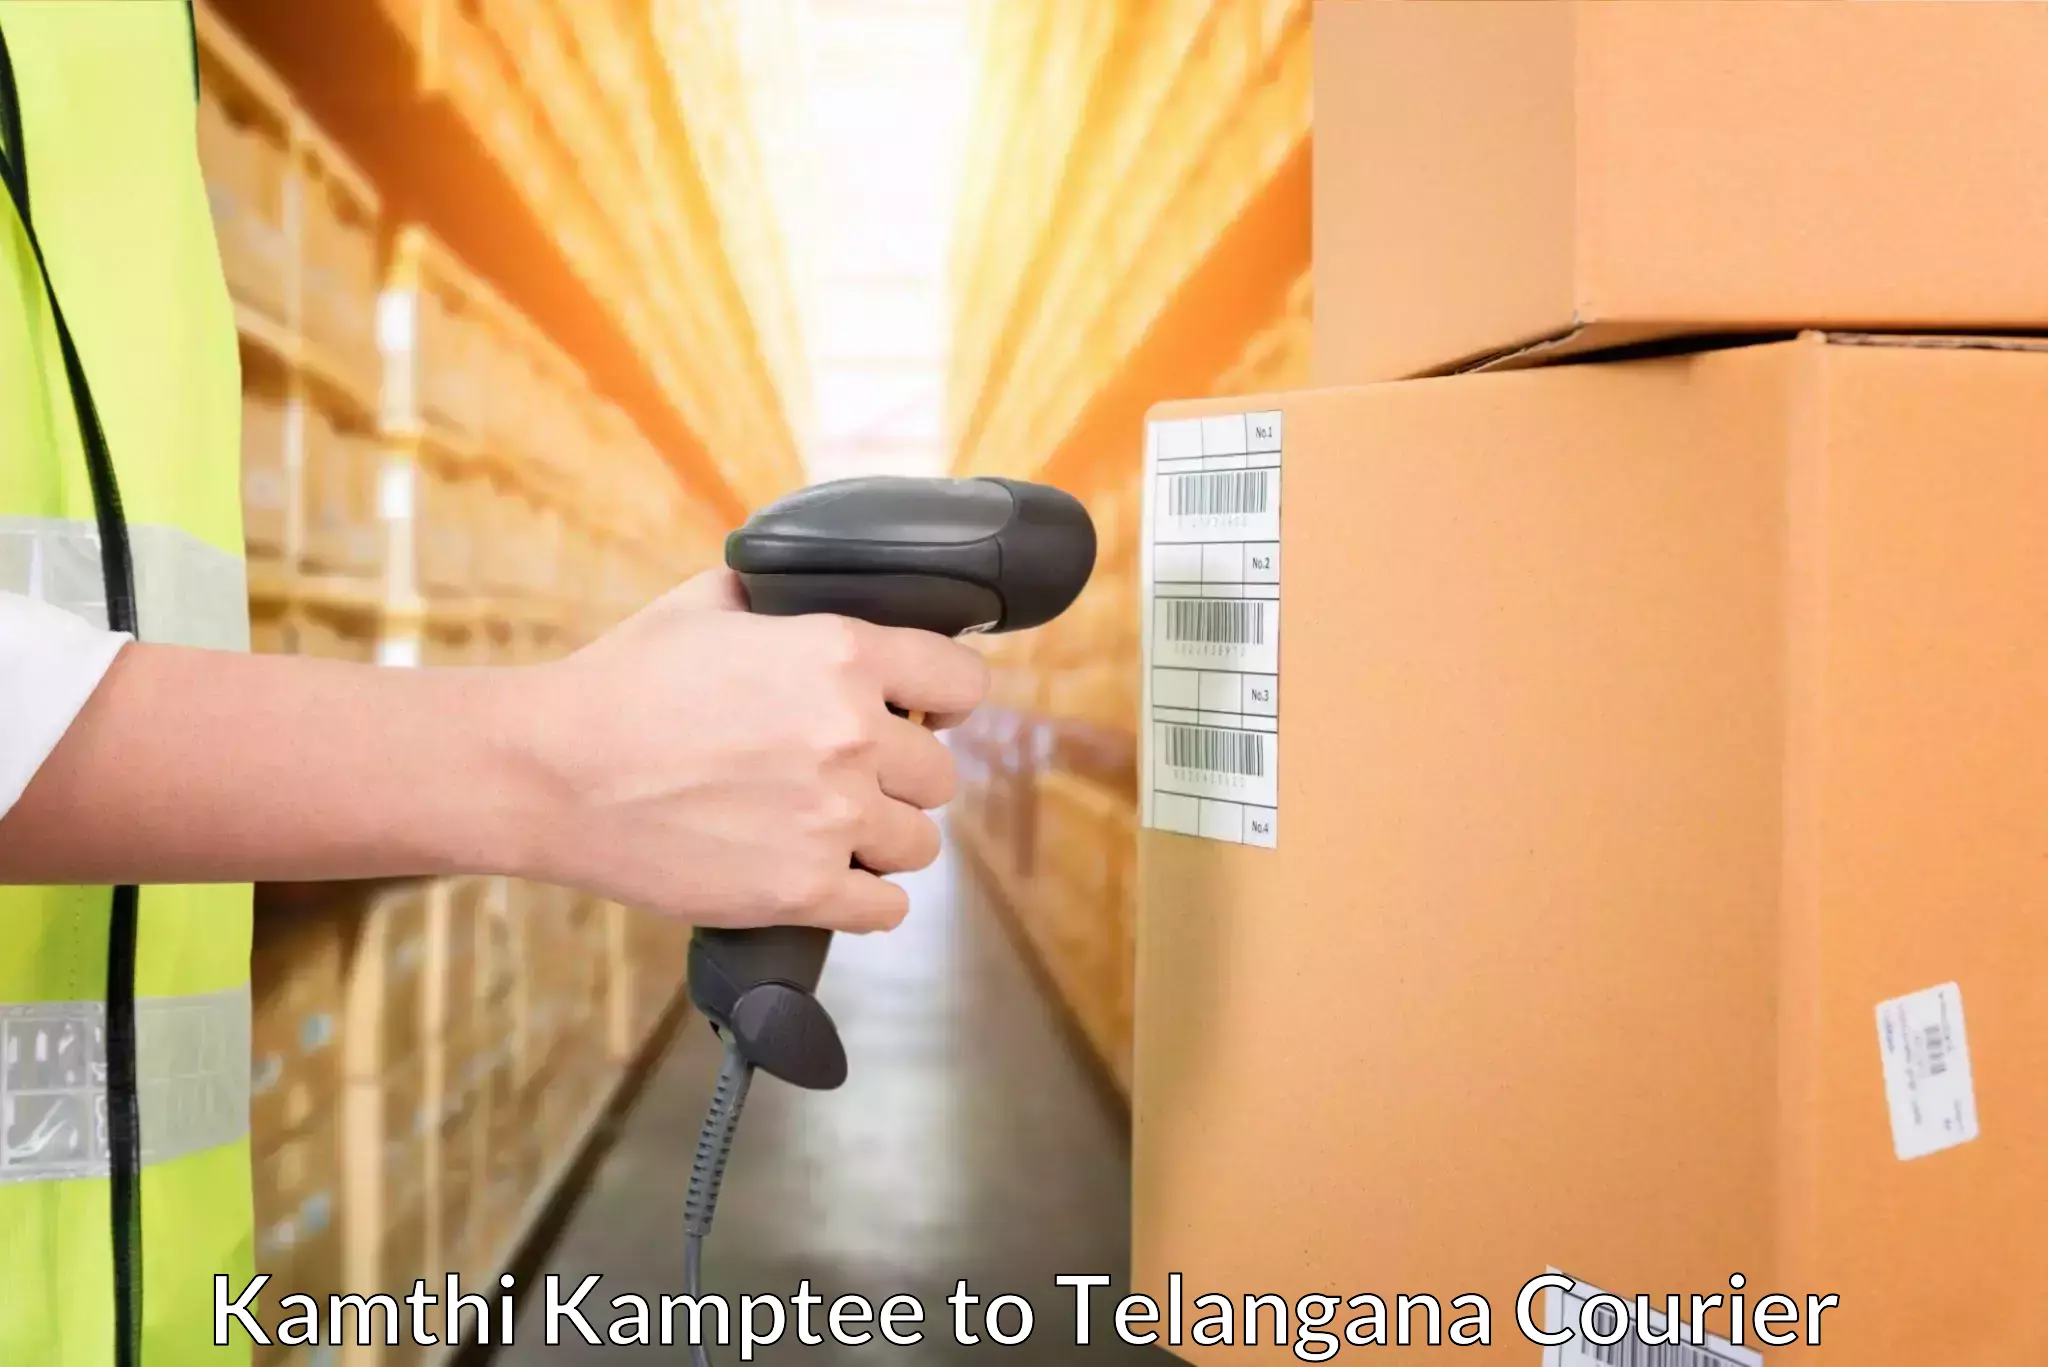 Seamless shipping experience Kamthi Kamptee to Ghanpur